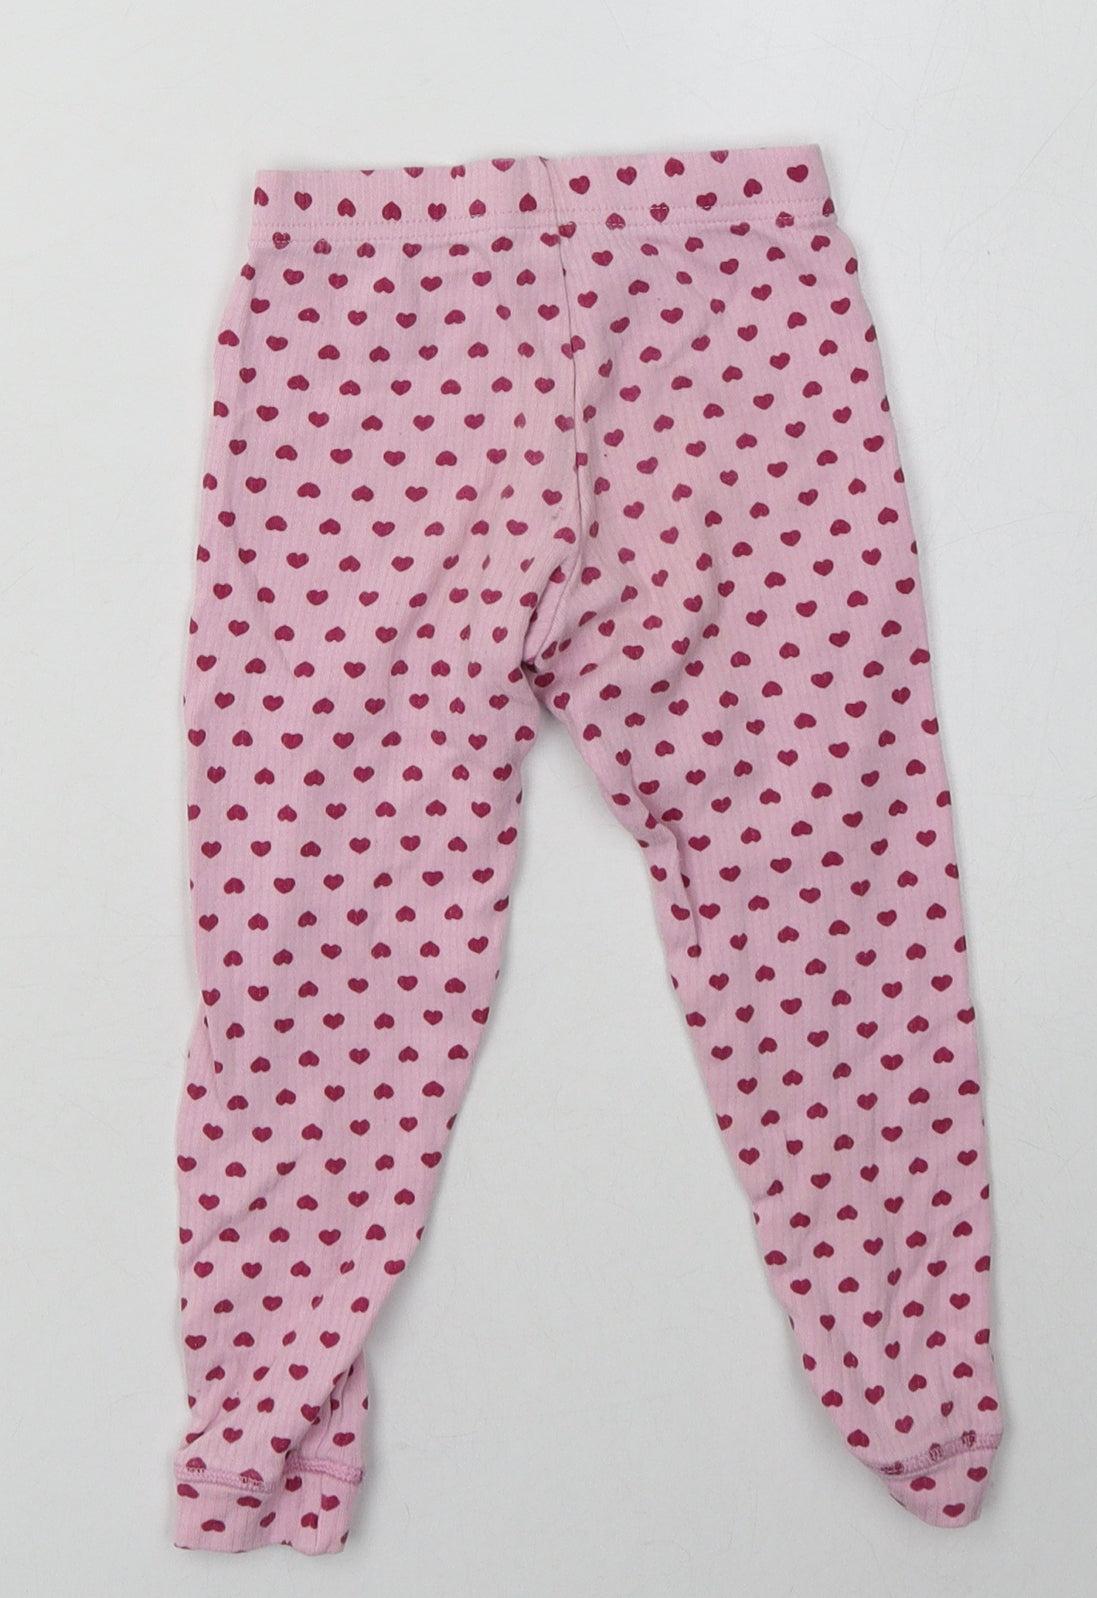 Marks and Spencer Girls Pink Geometric Polyester Capri Trousers Size 3-4 Years  Regular  - Heart Print